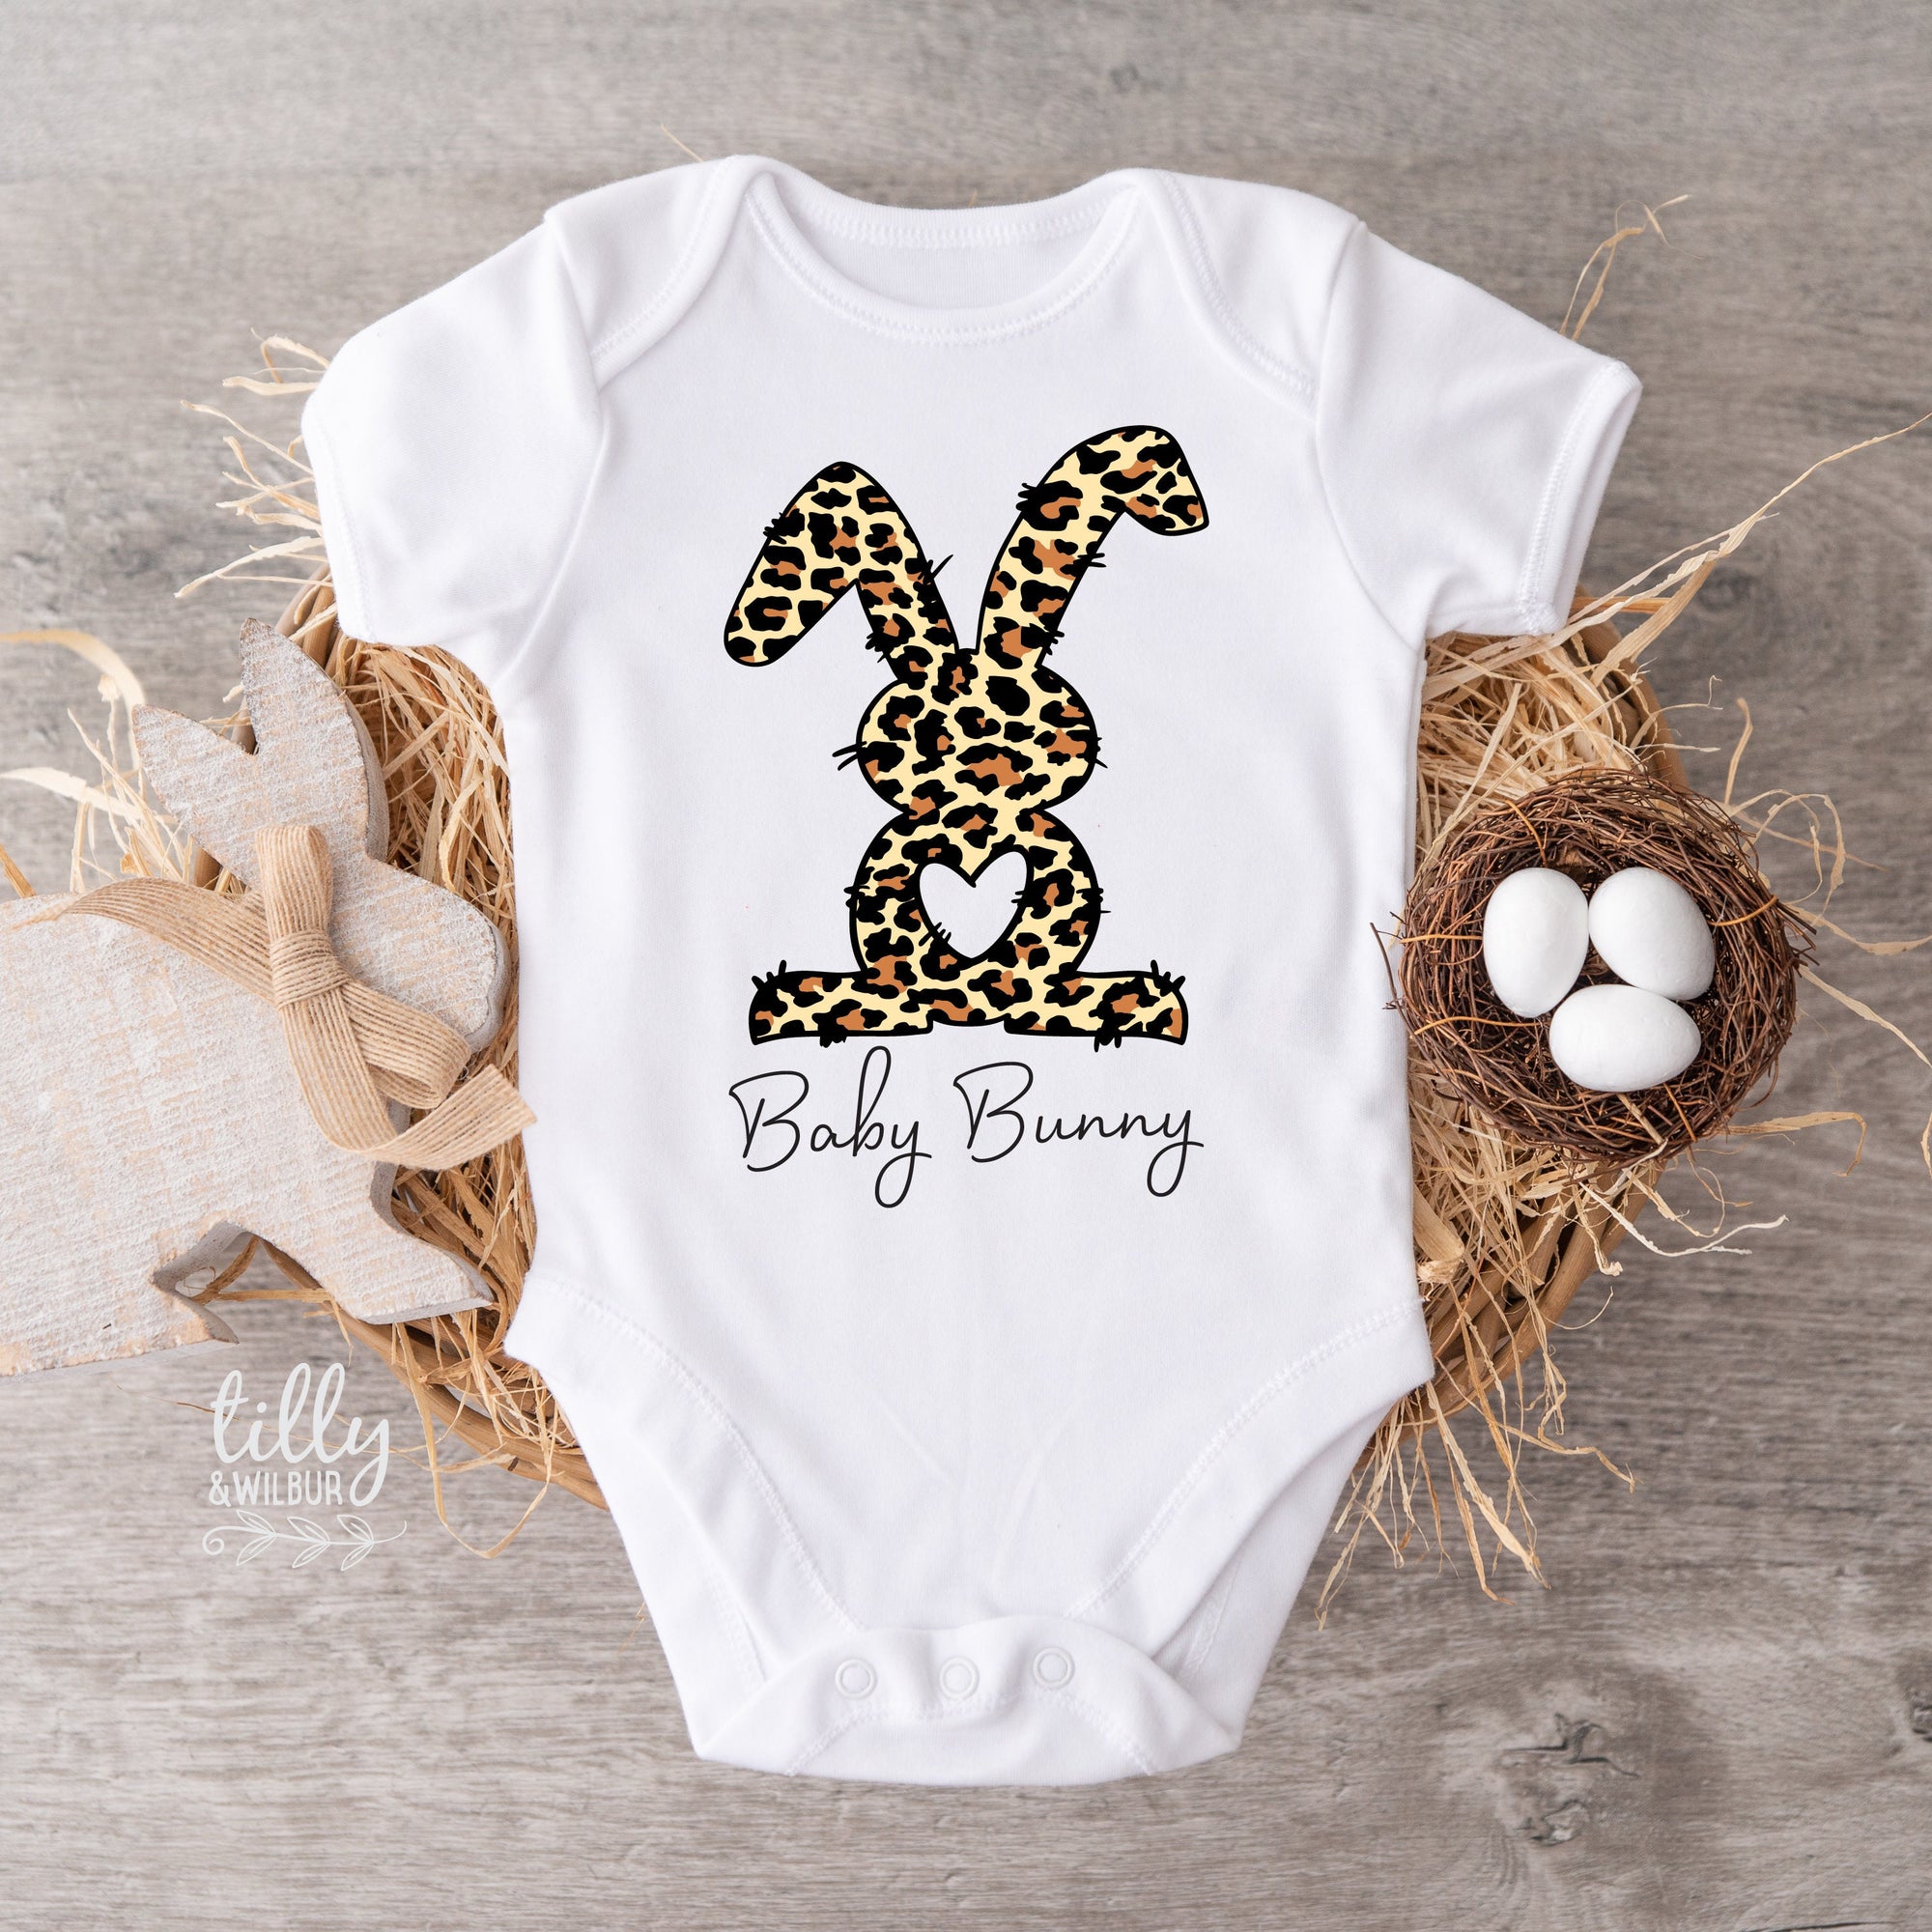 Easter Onesie, Baby Bunny Bodysuit, Easter Bodysuit, First Easter Baby Bodysuit, Newborn Easter Gift, 1st Easter Outfit, Baby's 1st Easter